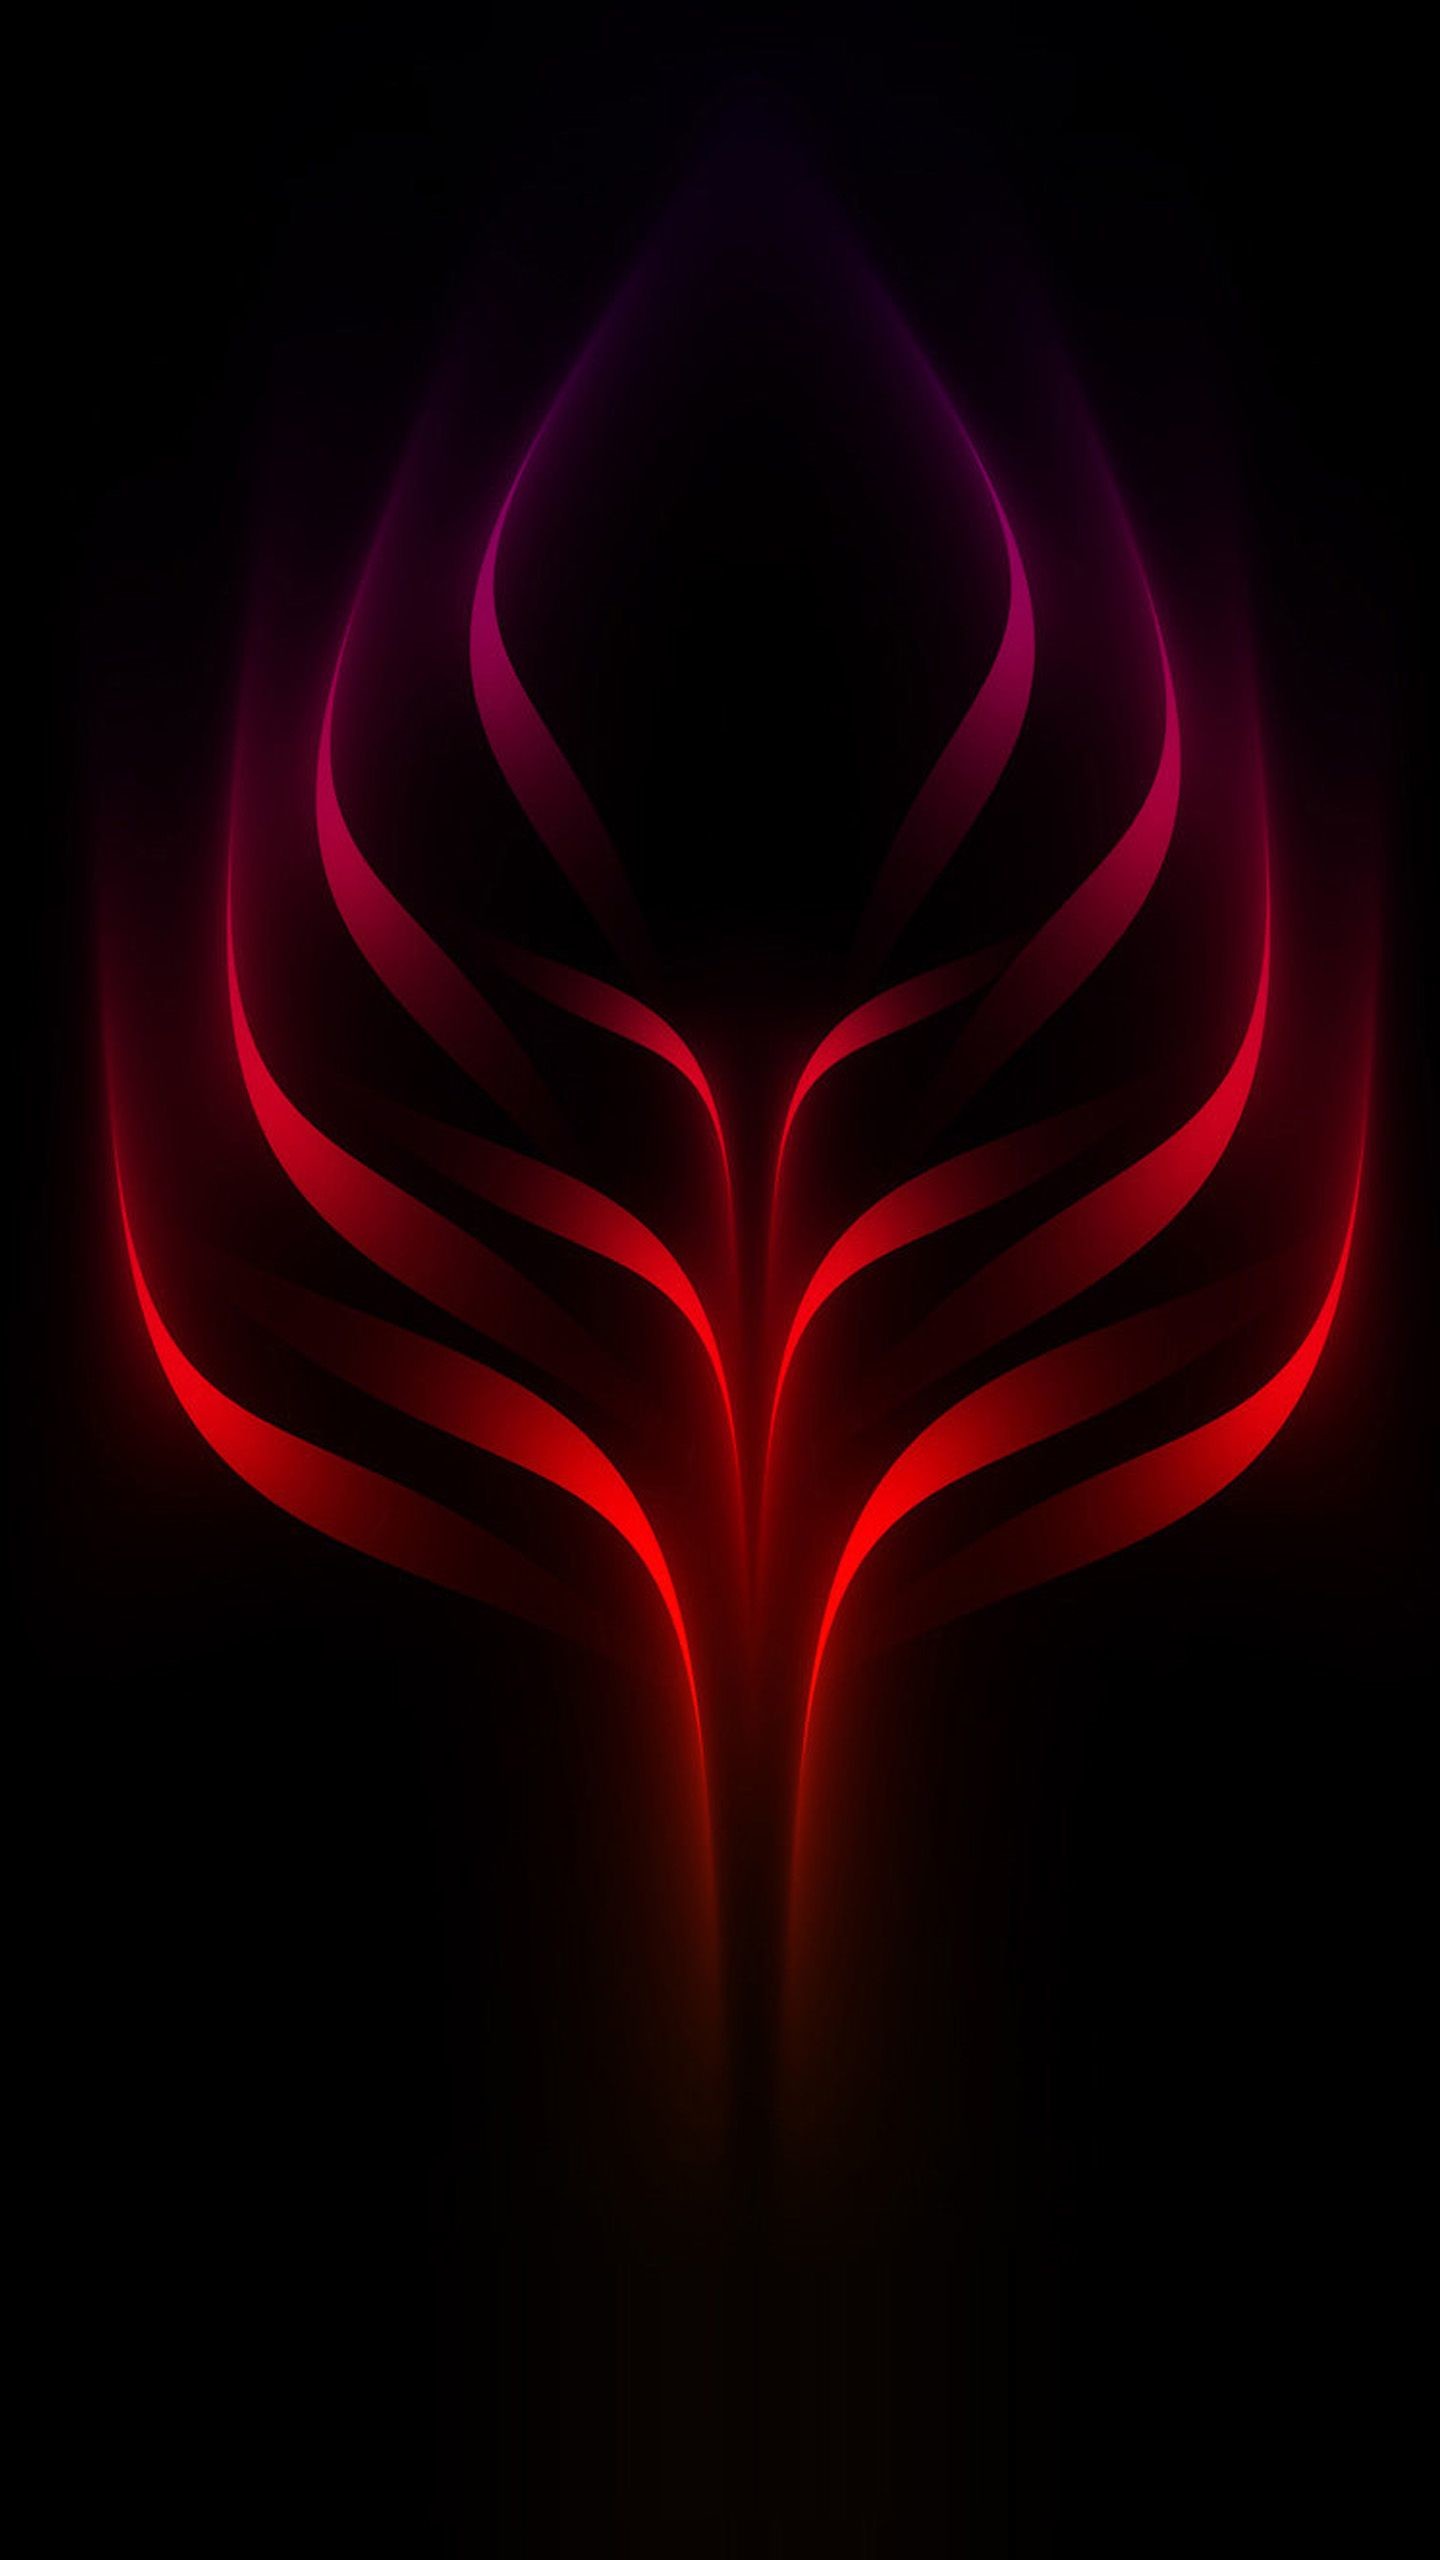 1440x2560 Red Abstract Mobile Phone Background. Phone BackgroundsMobile Phones